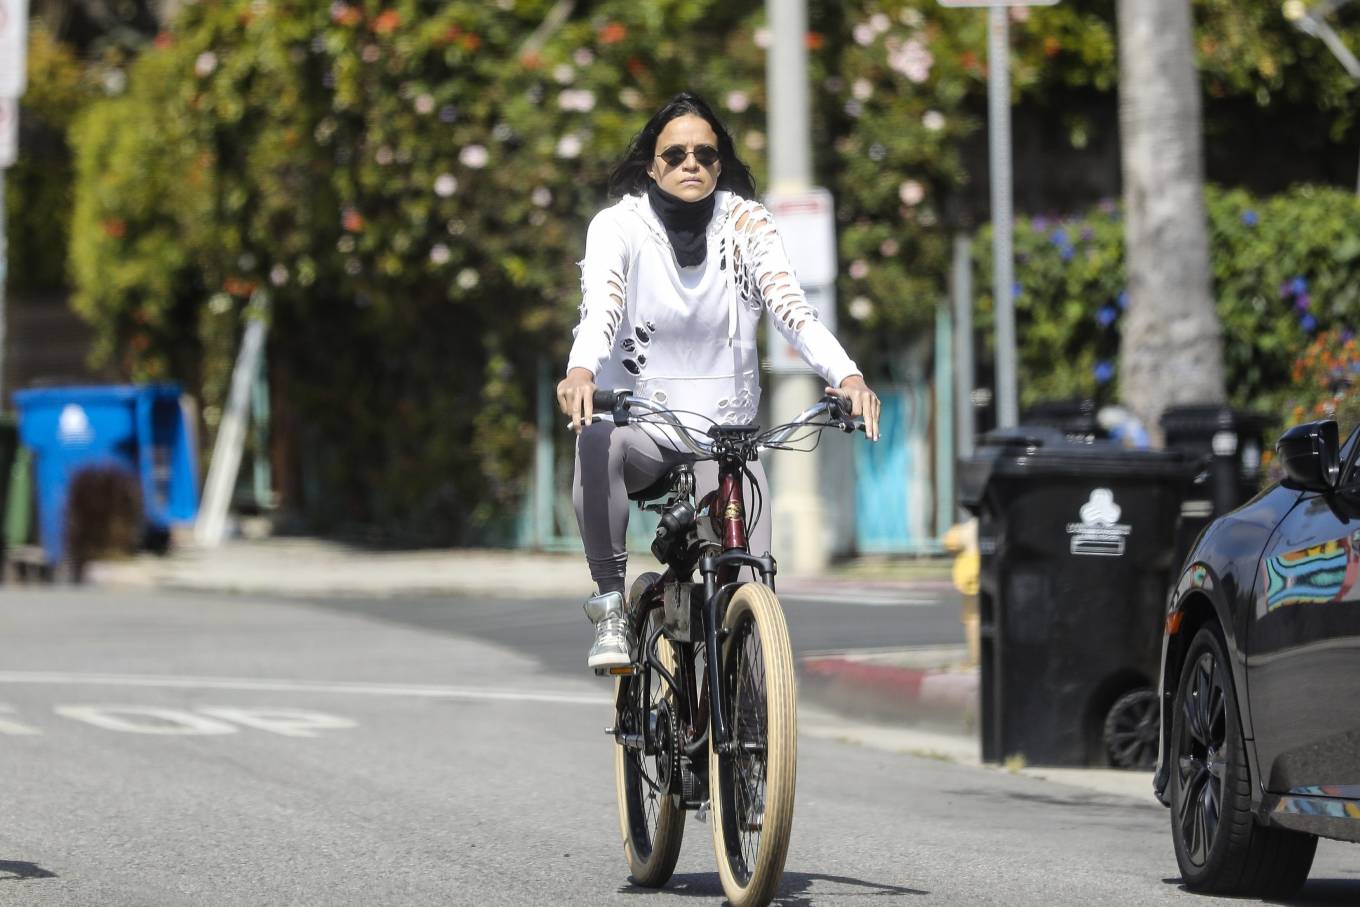 Michelle Rodriguez â€“ Rides a bike during COVID-19 pandemic in Los Angeles